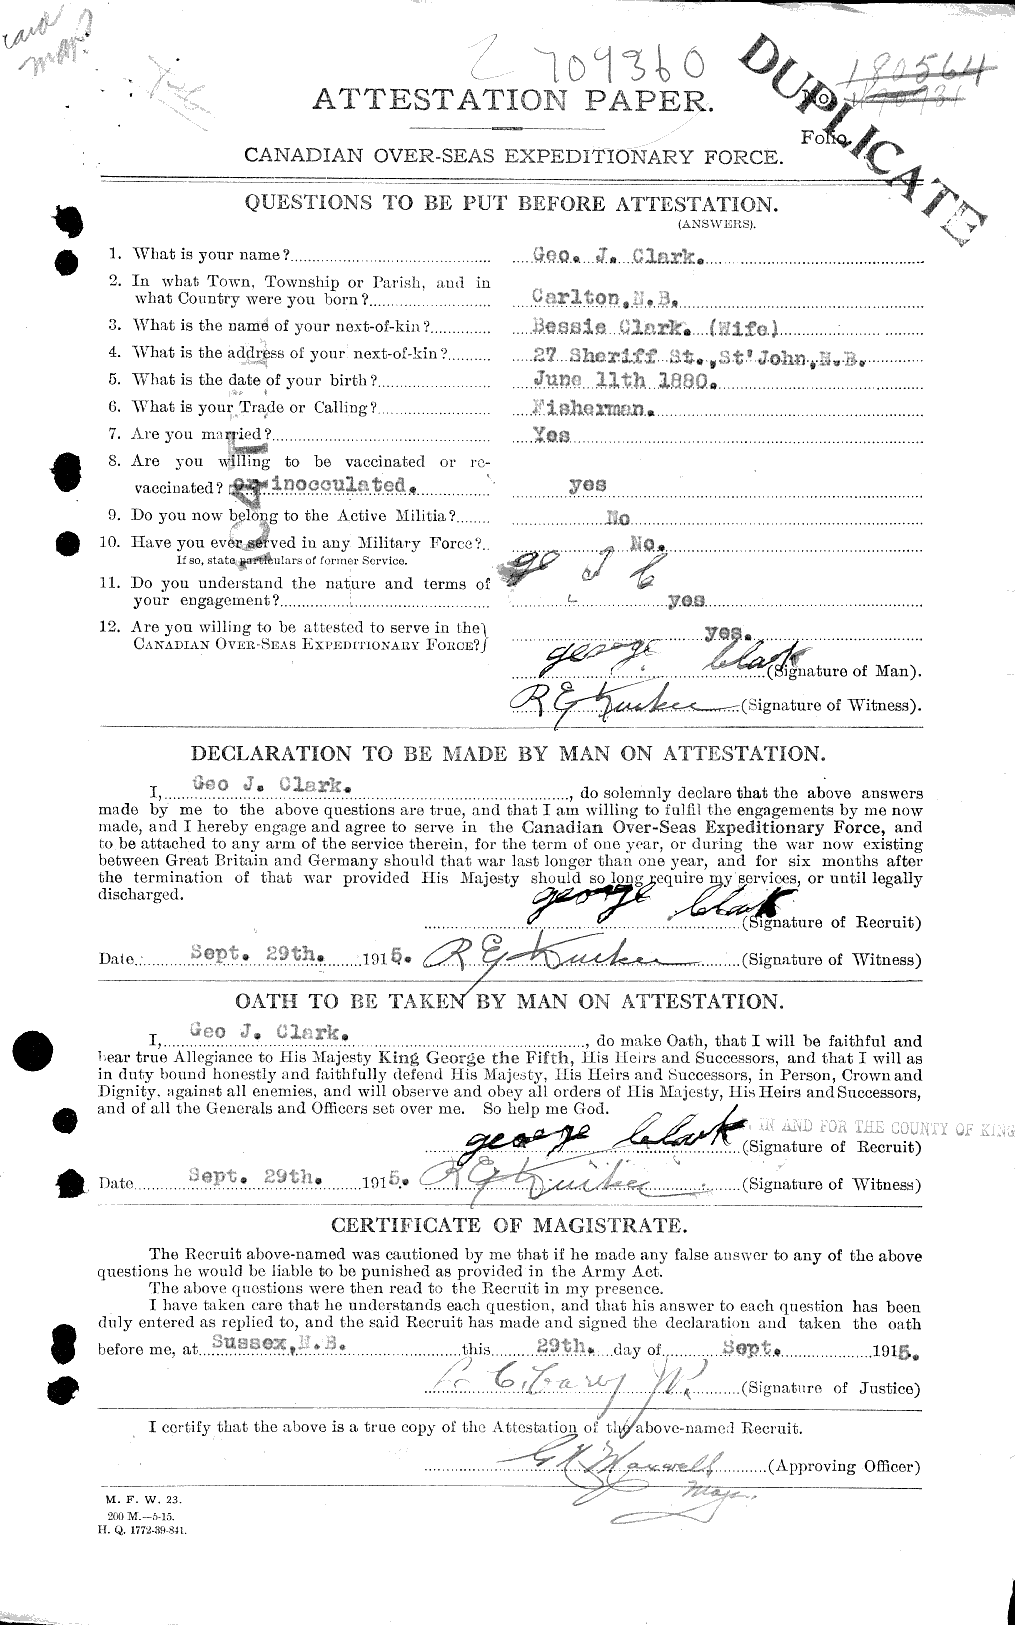 Personnel Records of the First World War - CEF 021083a